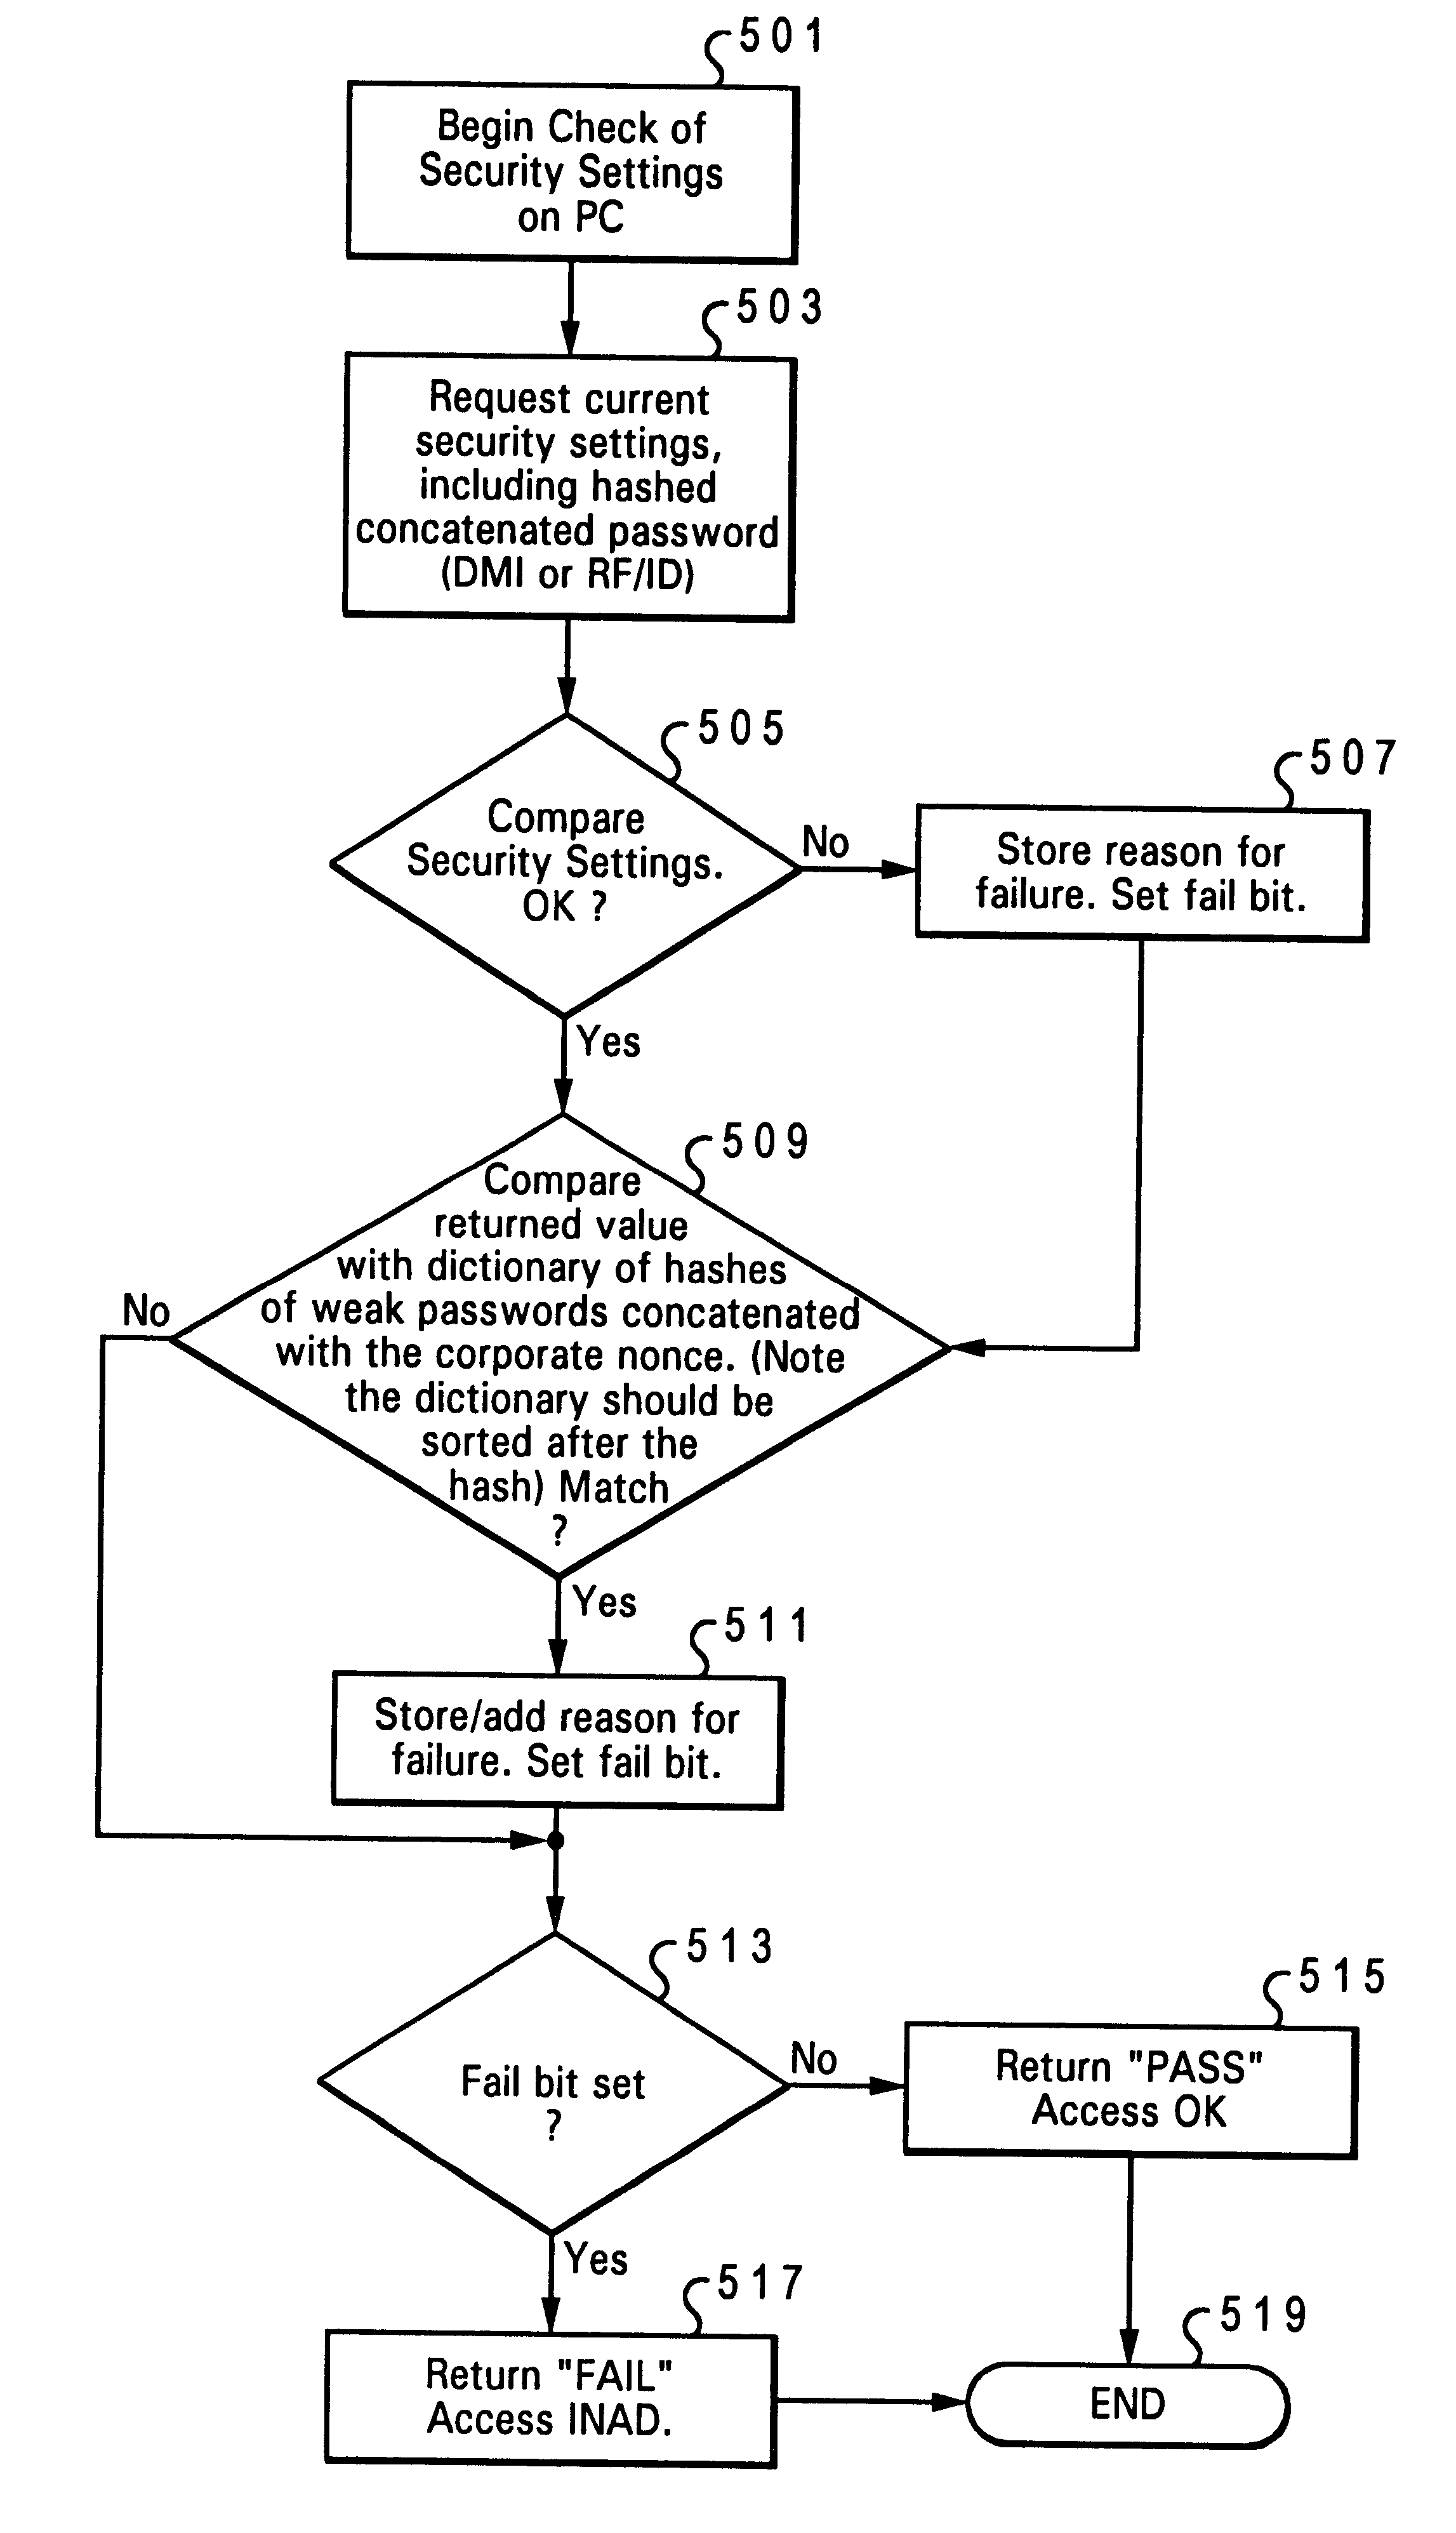 Discrete, background determination of the adequacy of security features of a computer system